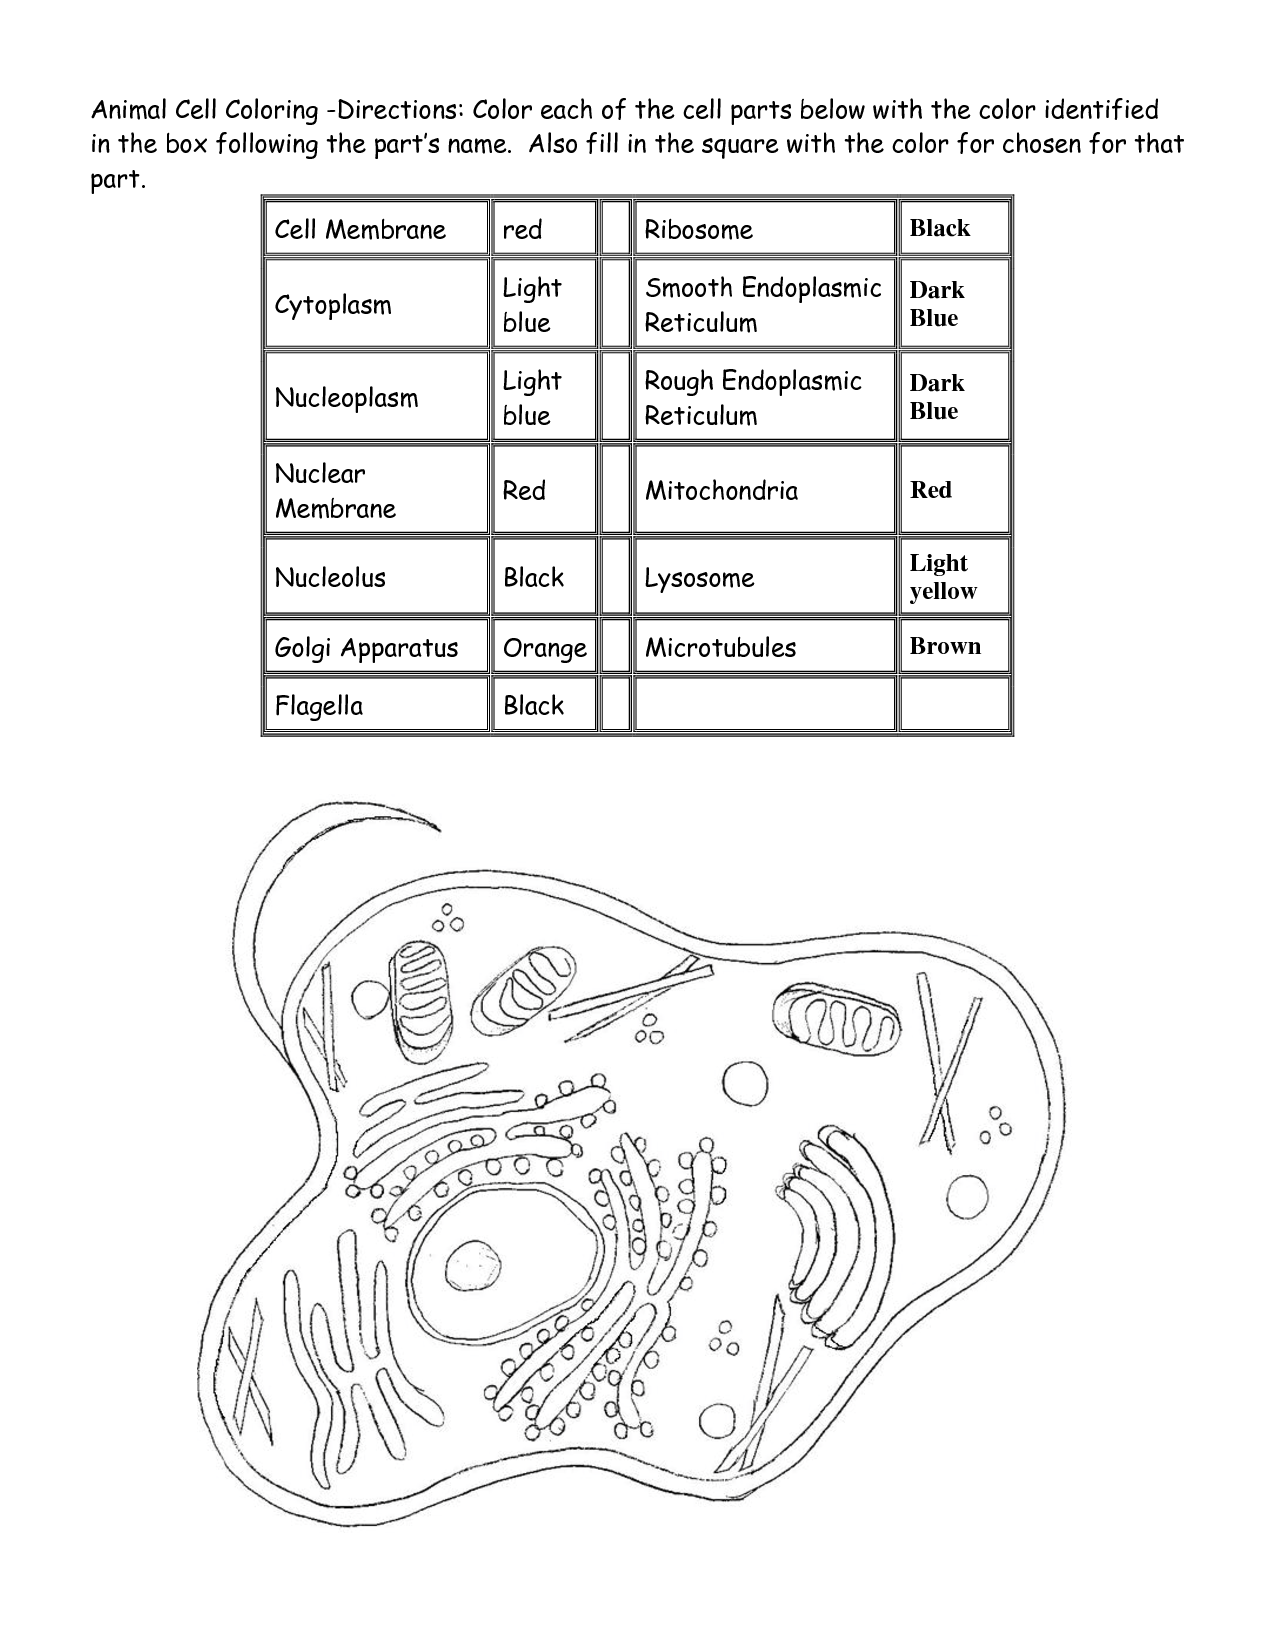 animal cell coloring page - Clip Art Library Regarding Animal Cells Coloring Worksheet